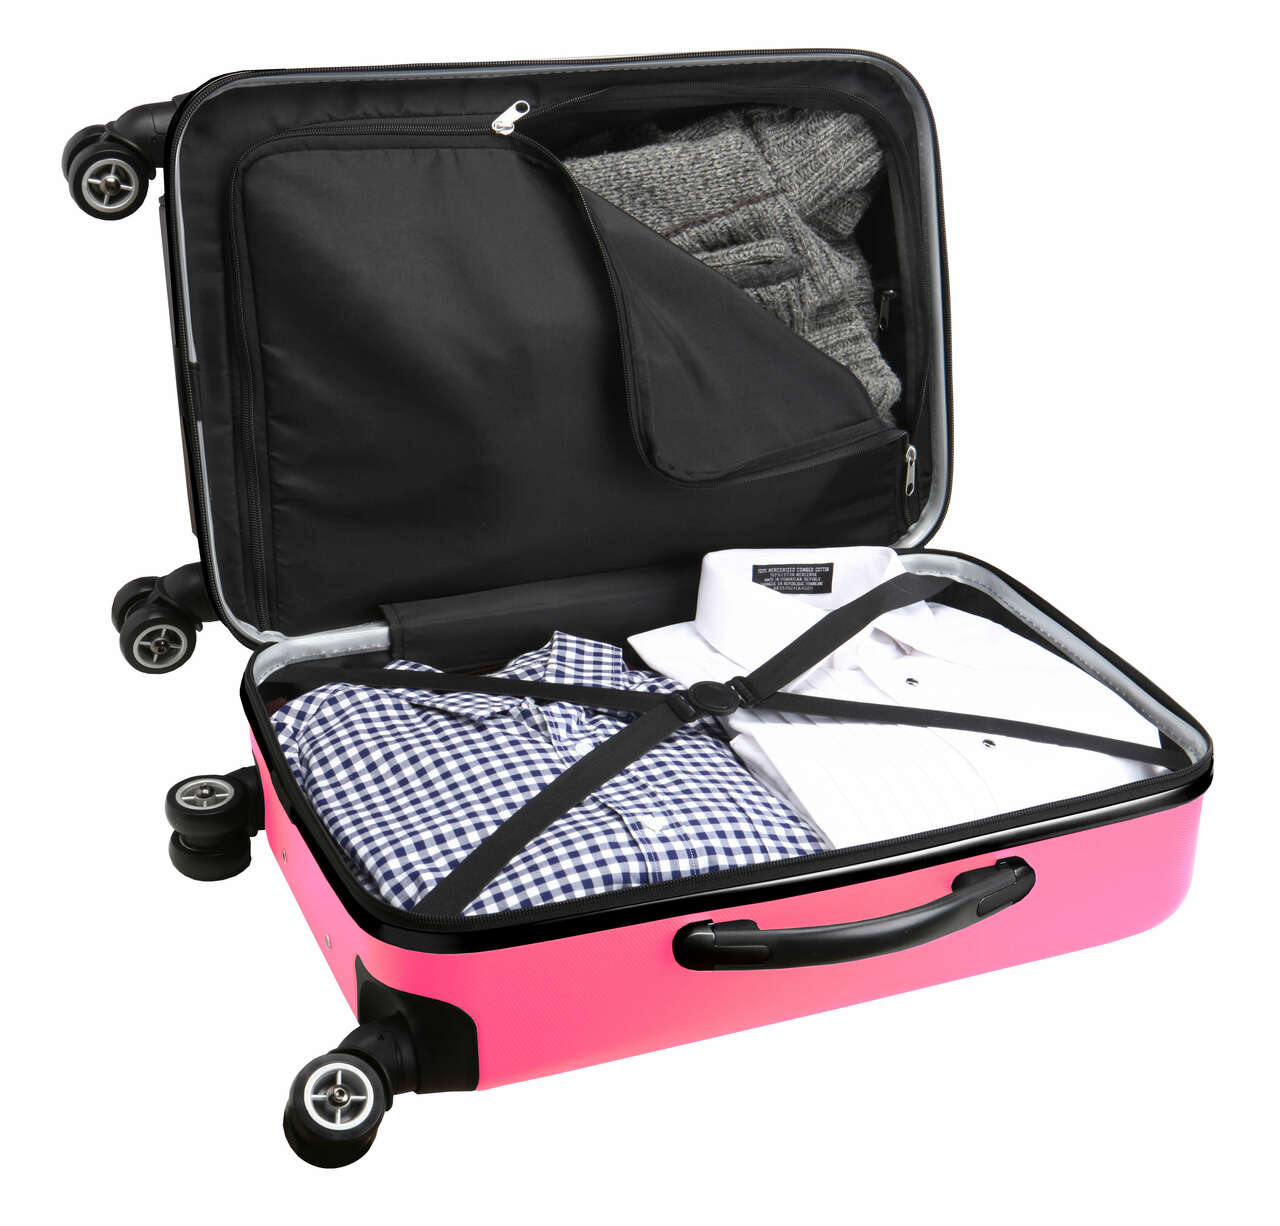 Oklahoma City Thunder 20" Pink Domestic Carry-on Spinner